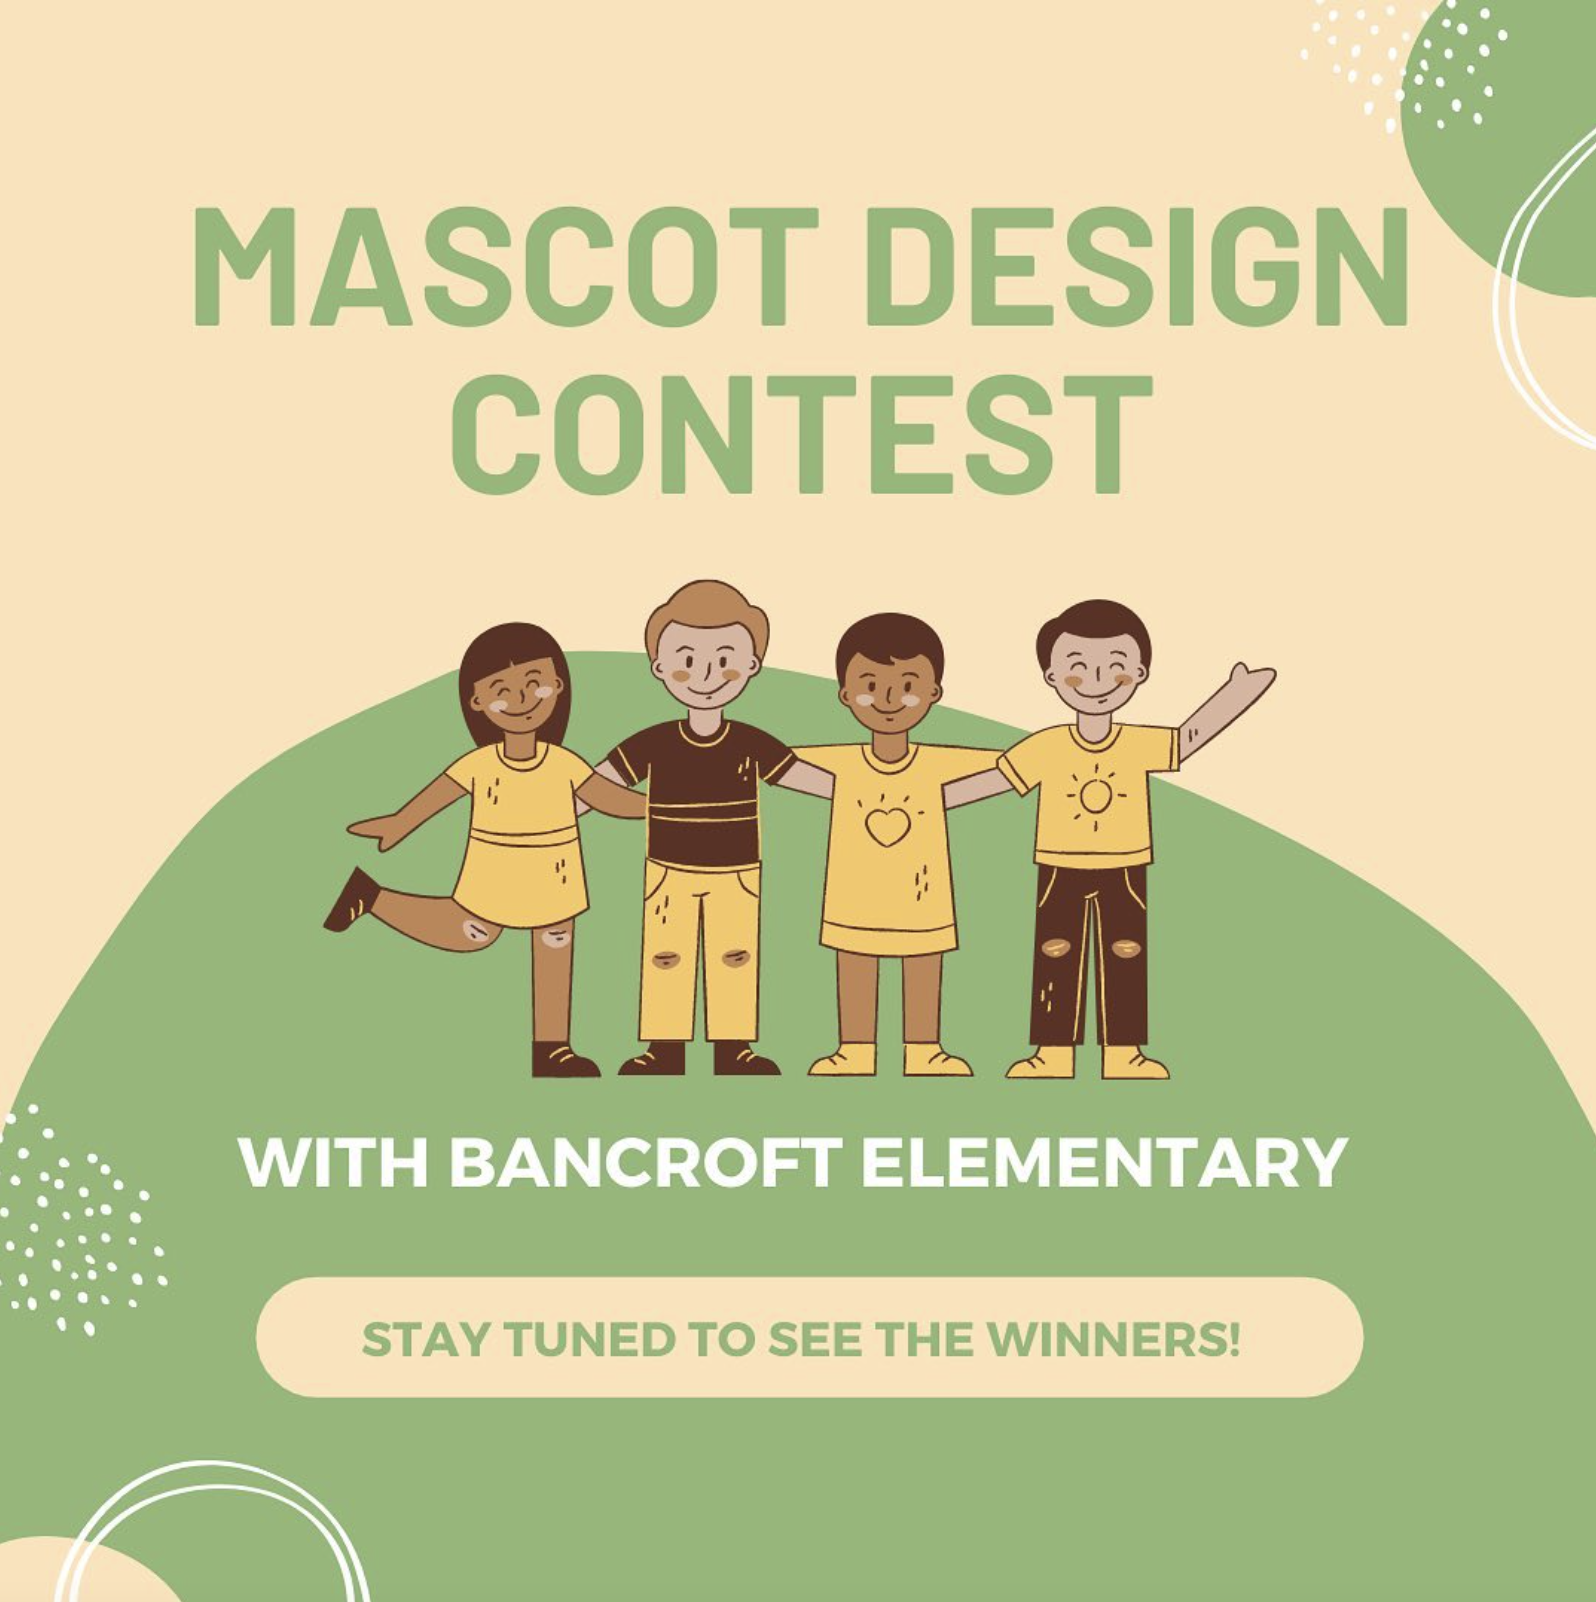 Children holding each other in support of a mascot design contest